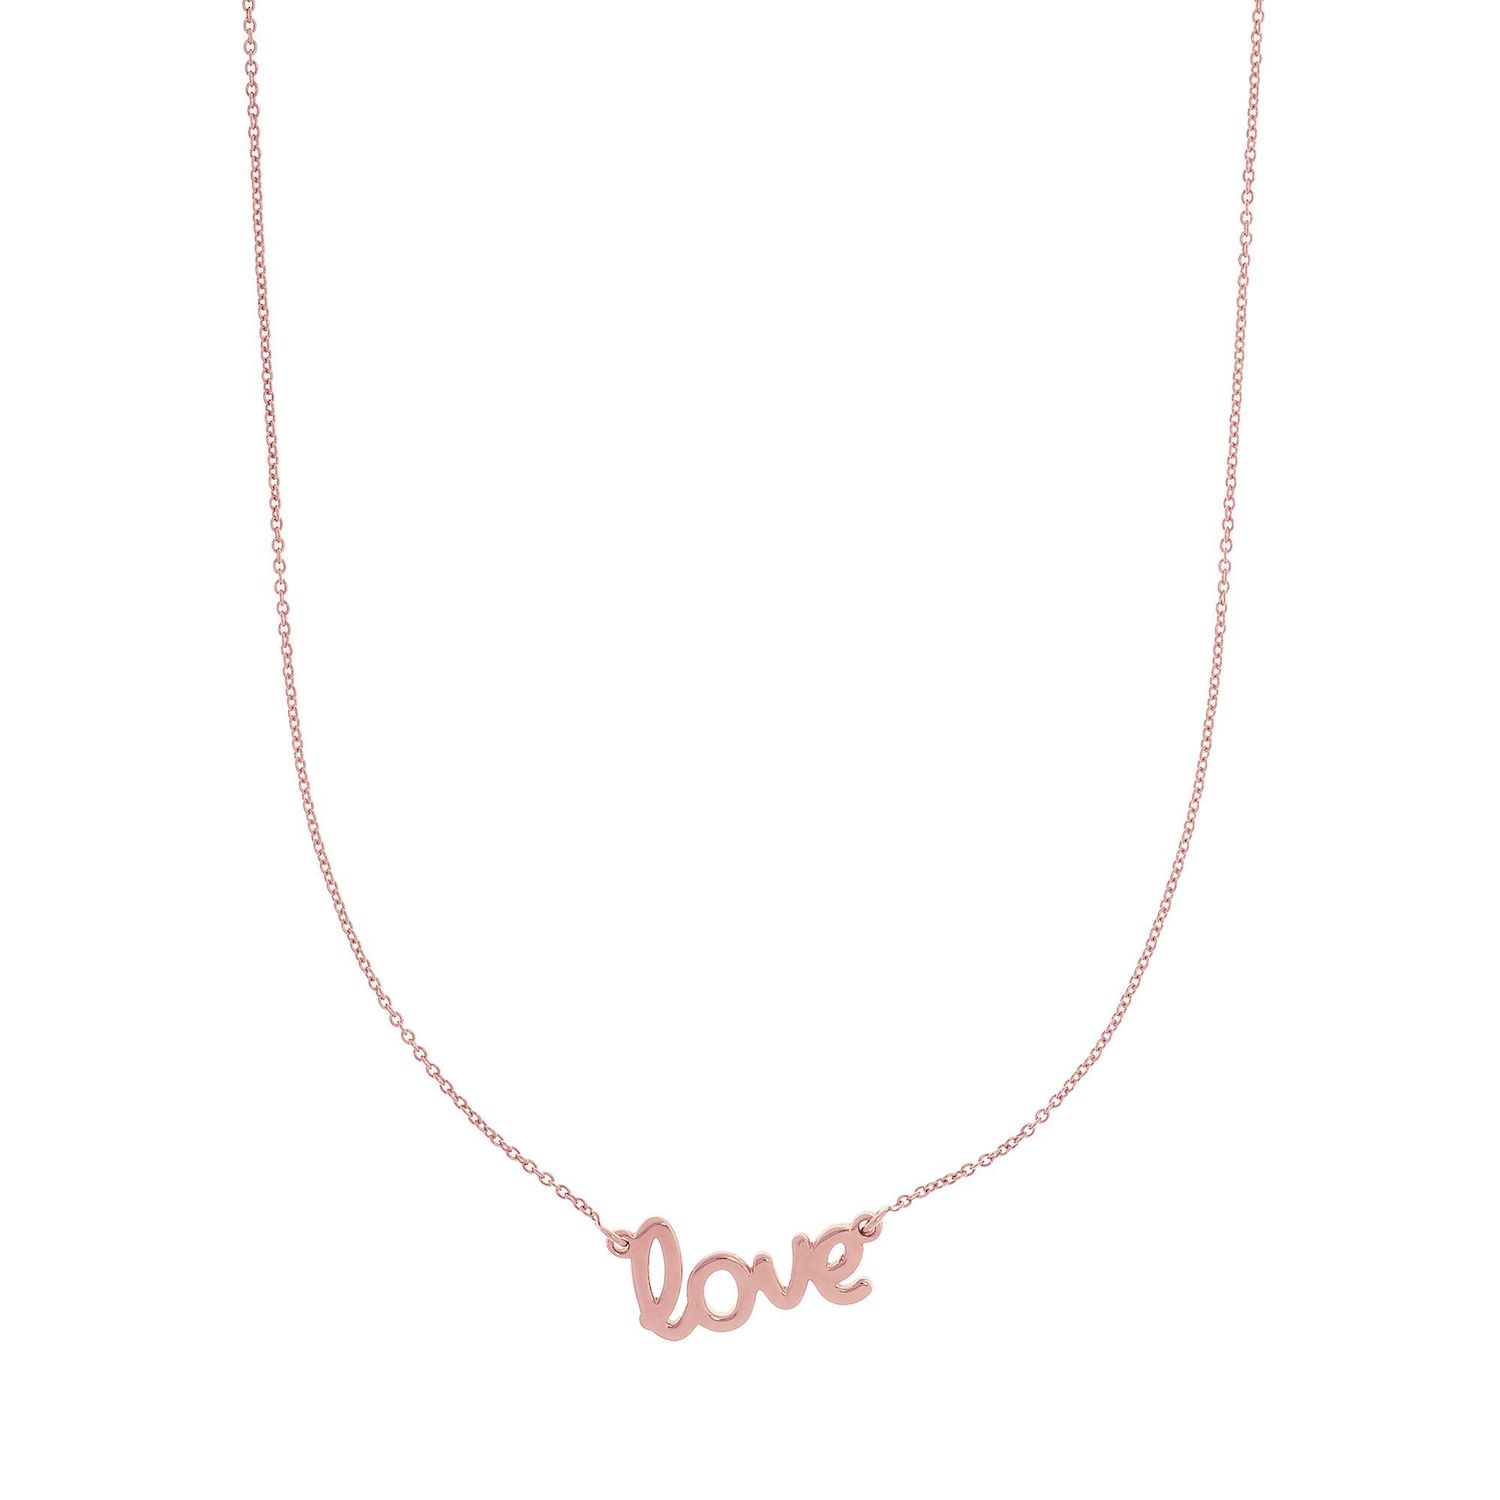 14K Gold Rose Yellow LOVE Pendant Chain Necklace 16"-18" Adjustable - Rose Gold